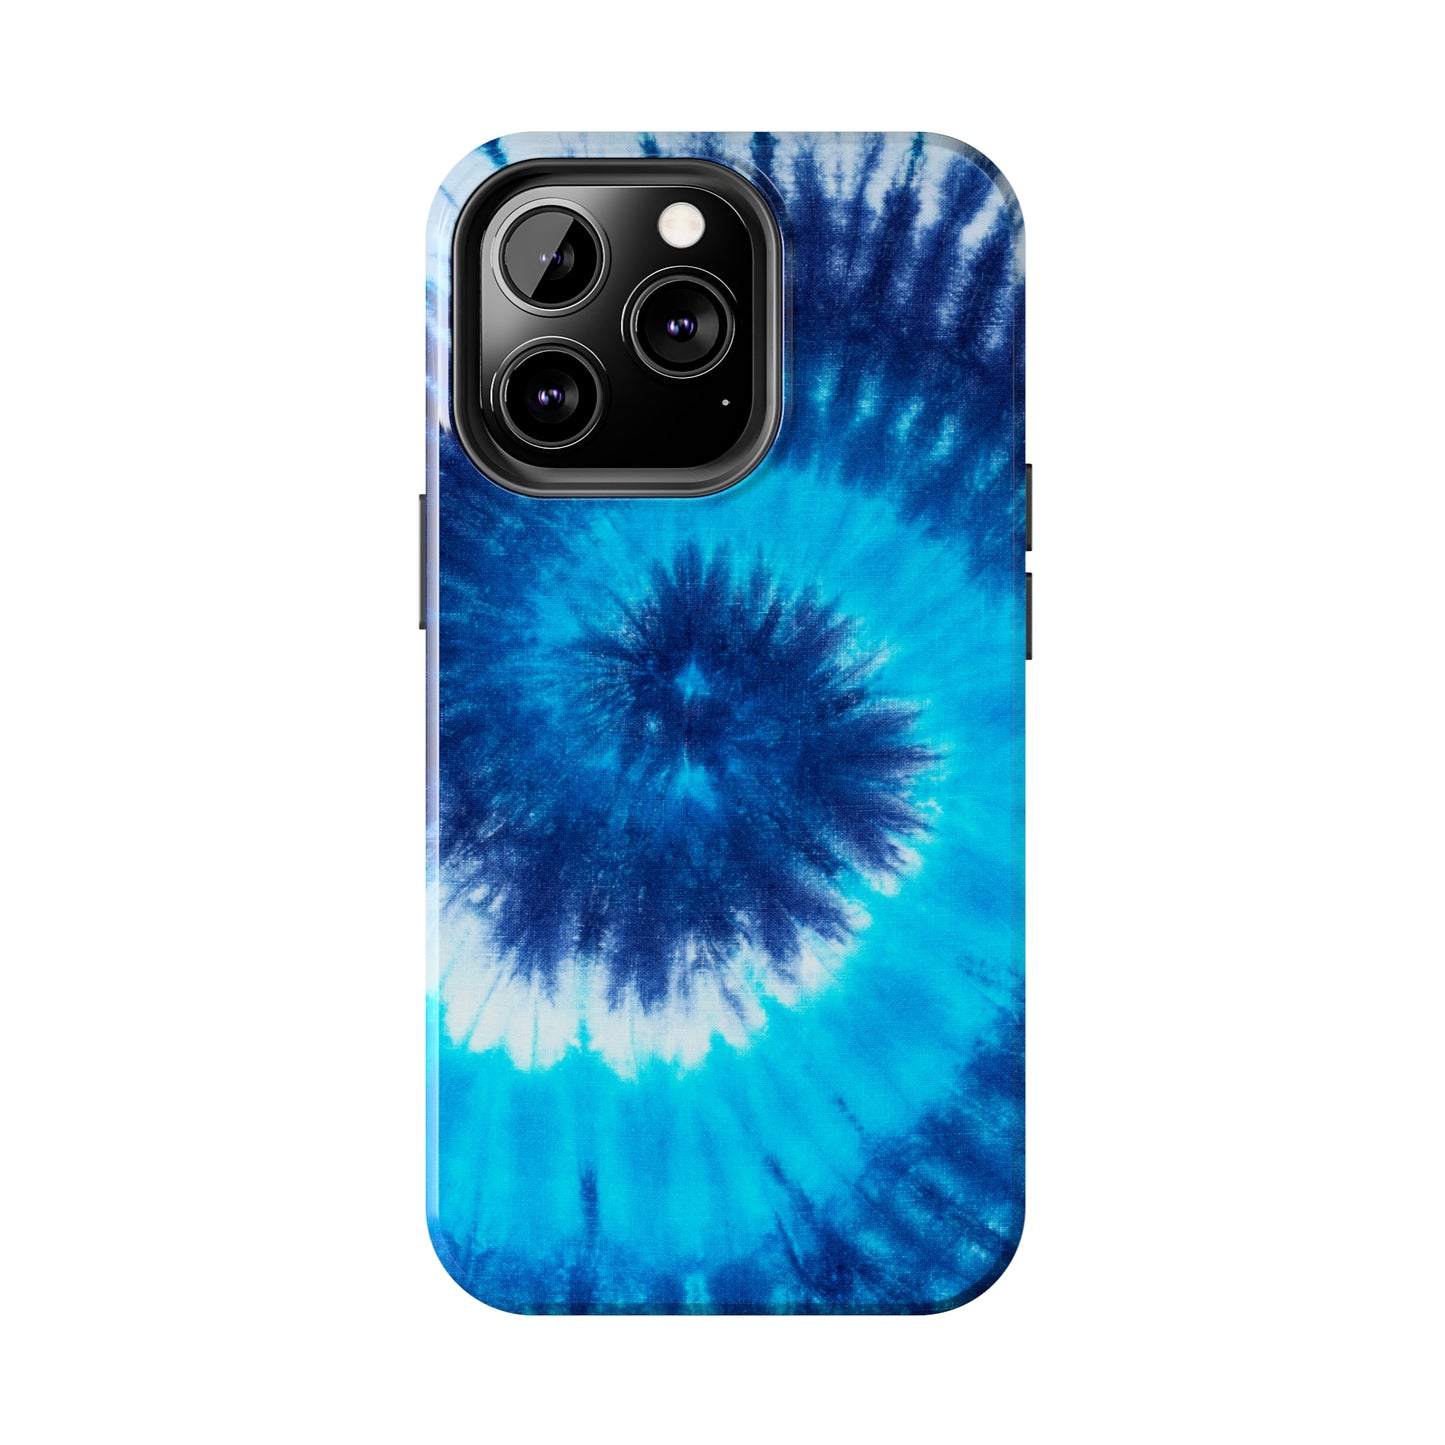 Copy of All iPhone Models: Blue Tie Dye Tough Phone Cases